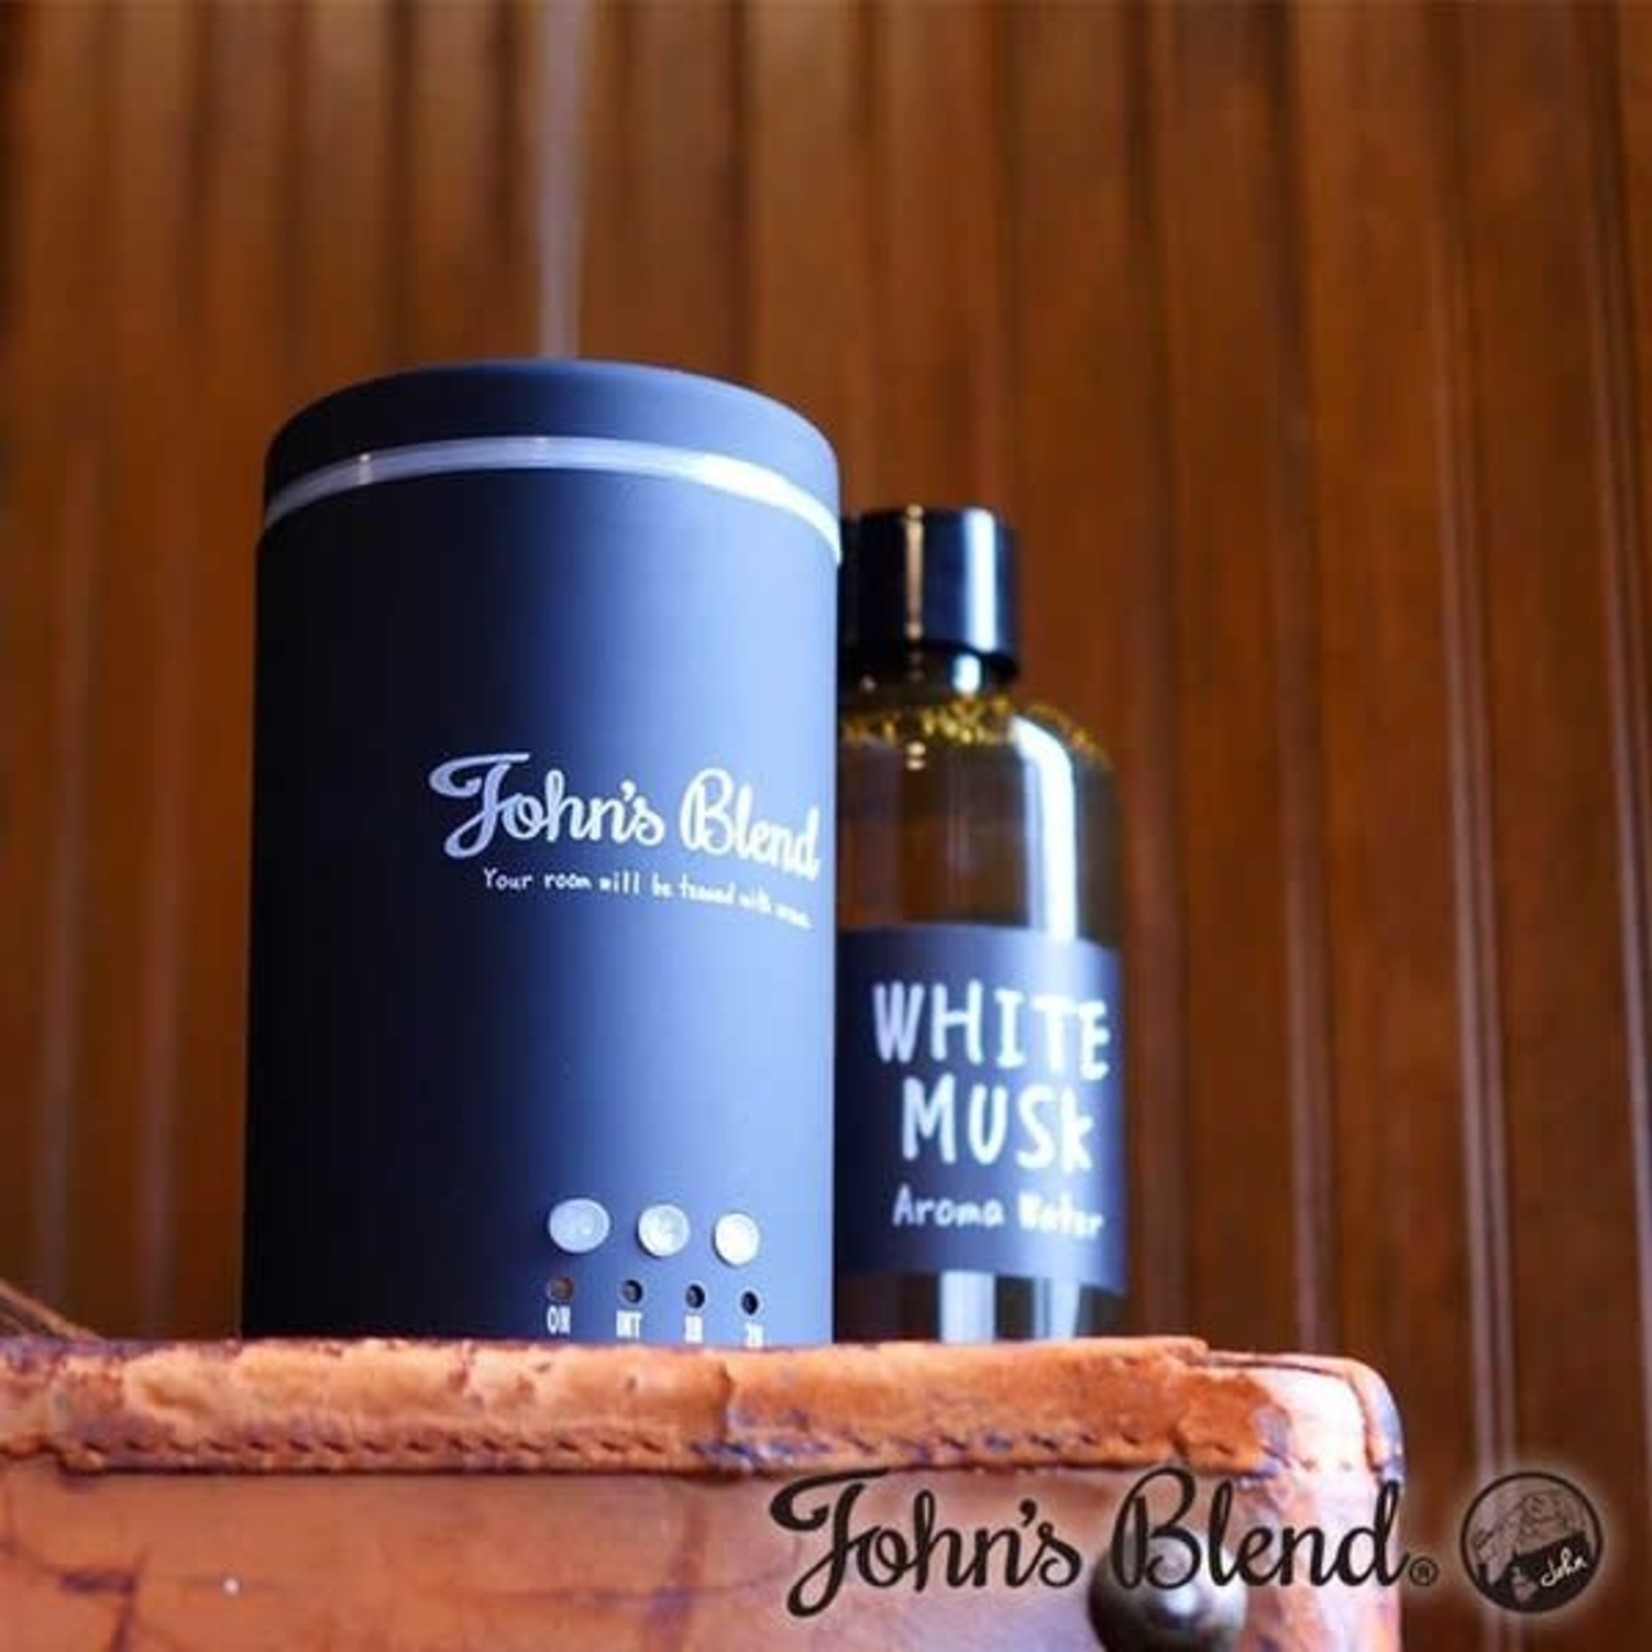 John's Blend Electric Aroma Diffuser